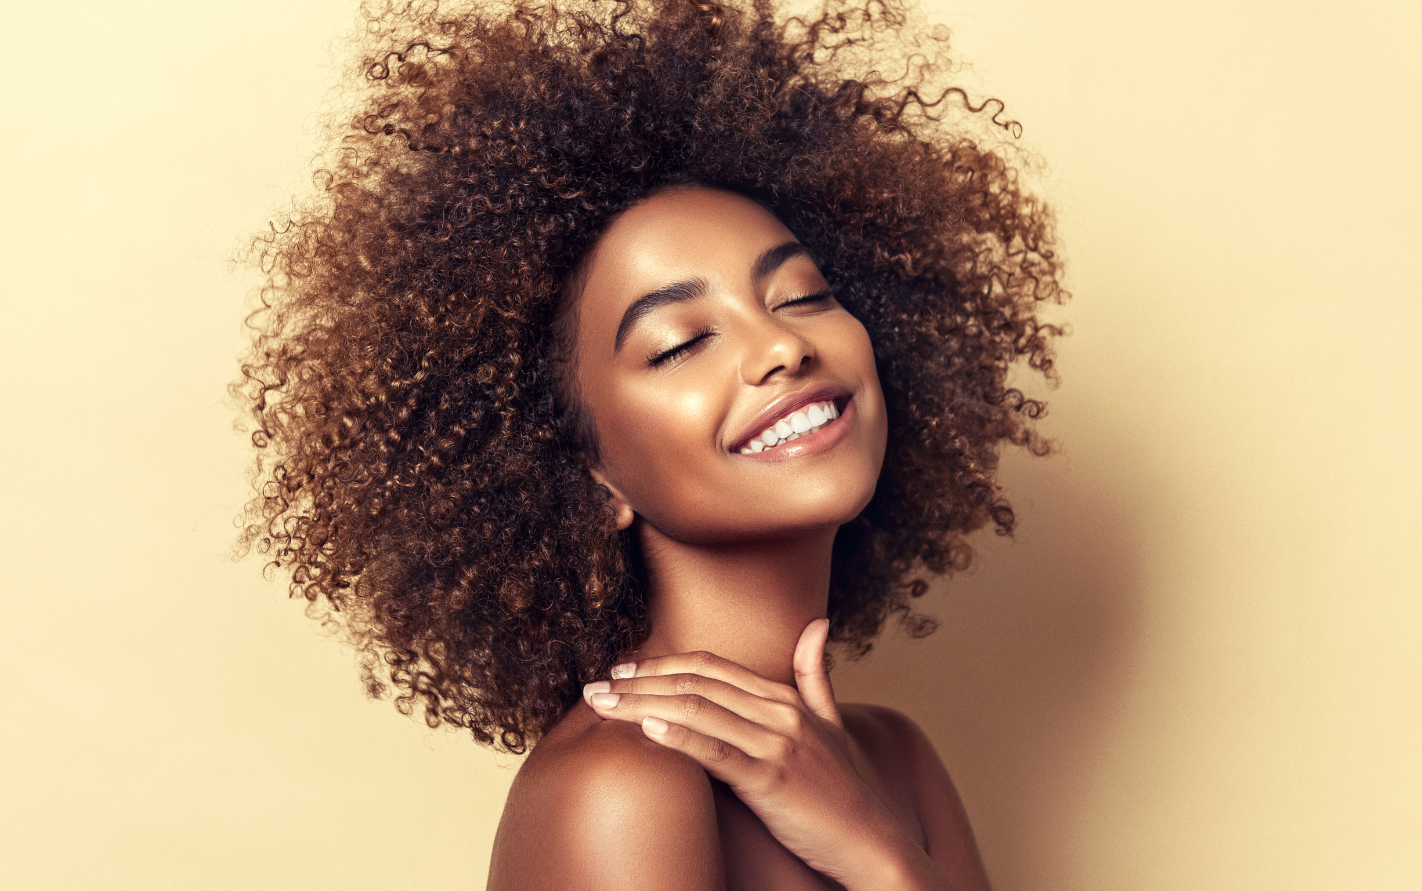 black woman with curly hair smiling with her eyes closed and her hand placed on her shoulder